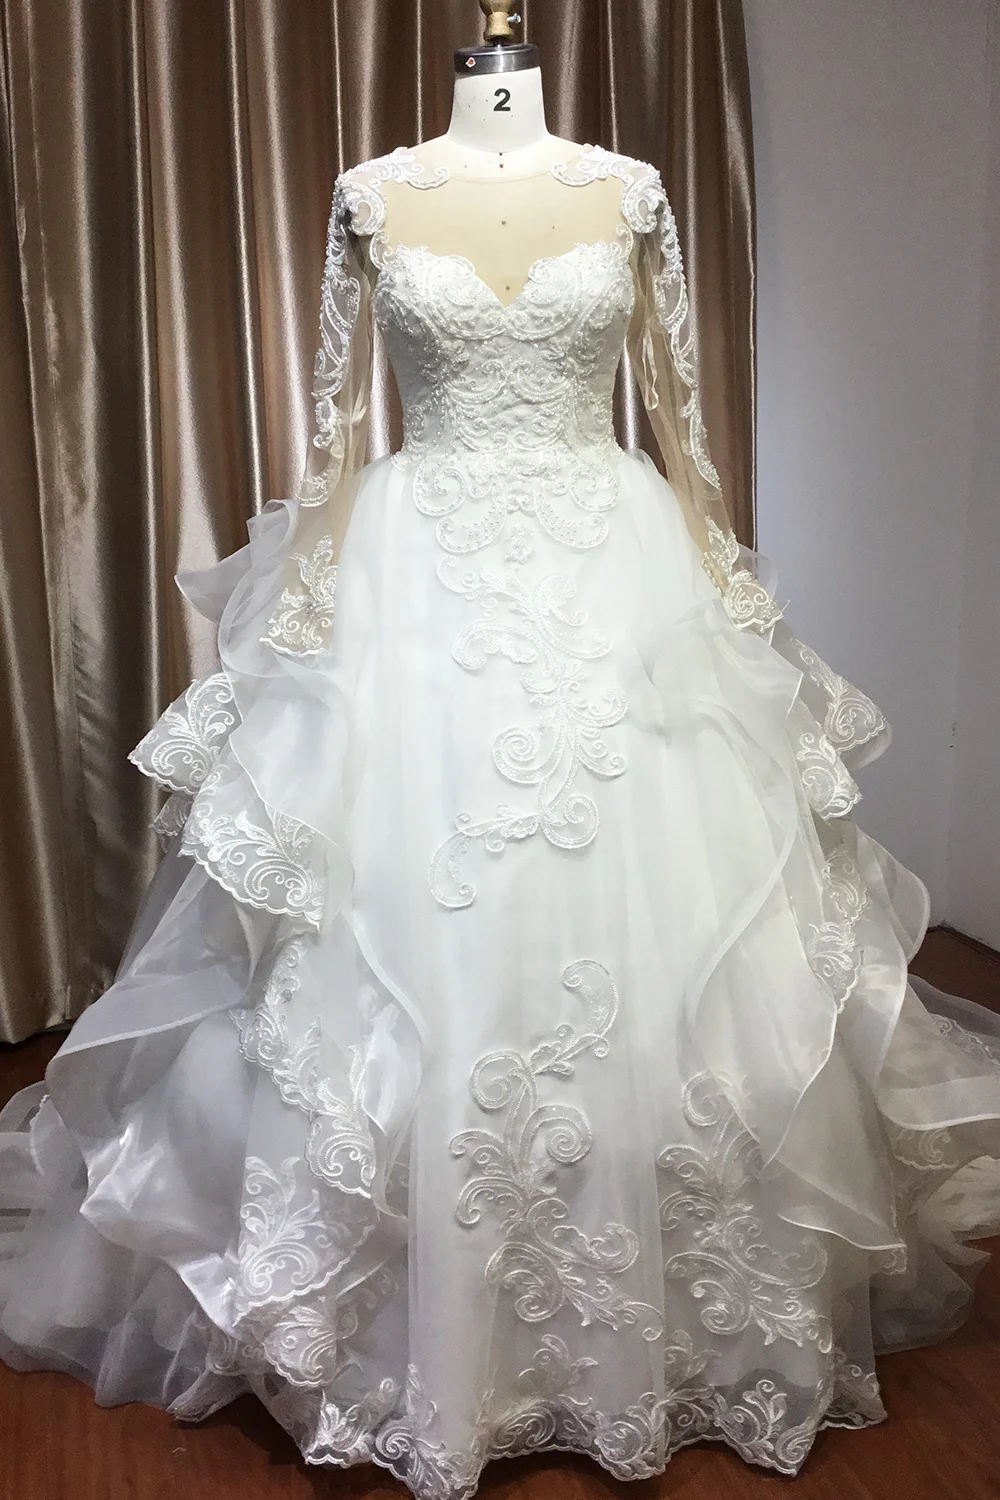 Daisda Long Sleeve Ruffles Ball Gown Wedding Dress With Lace Appliques